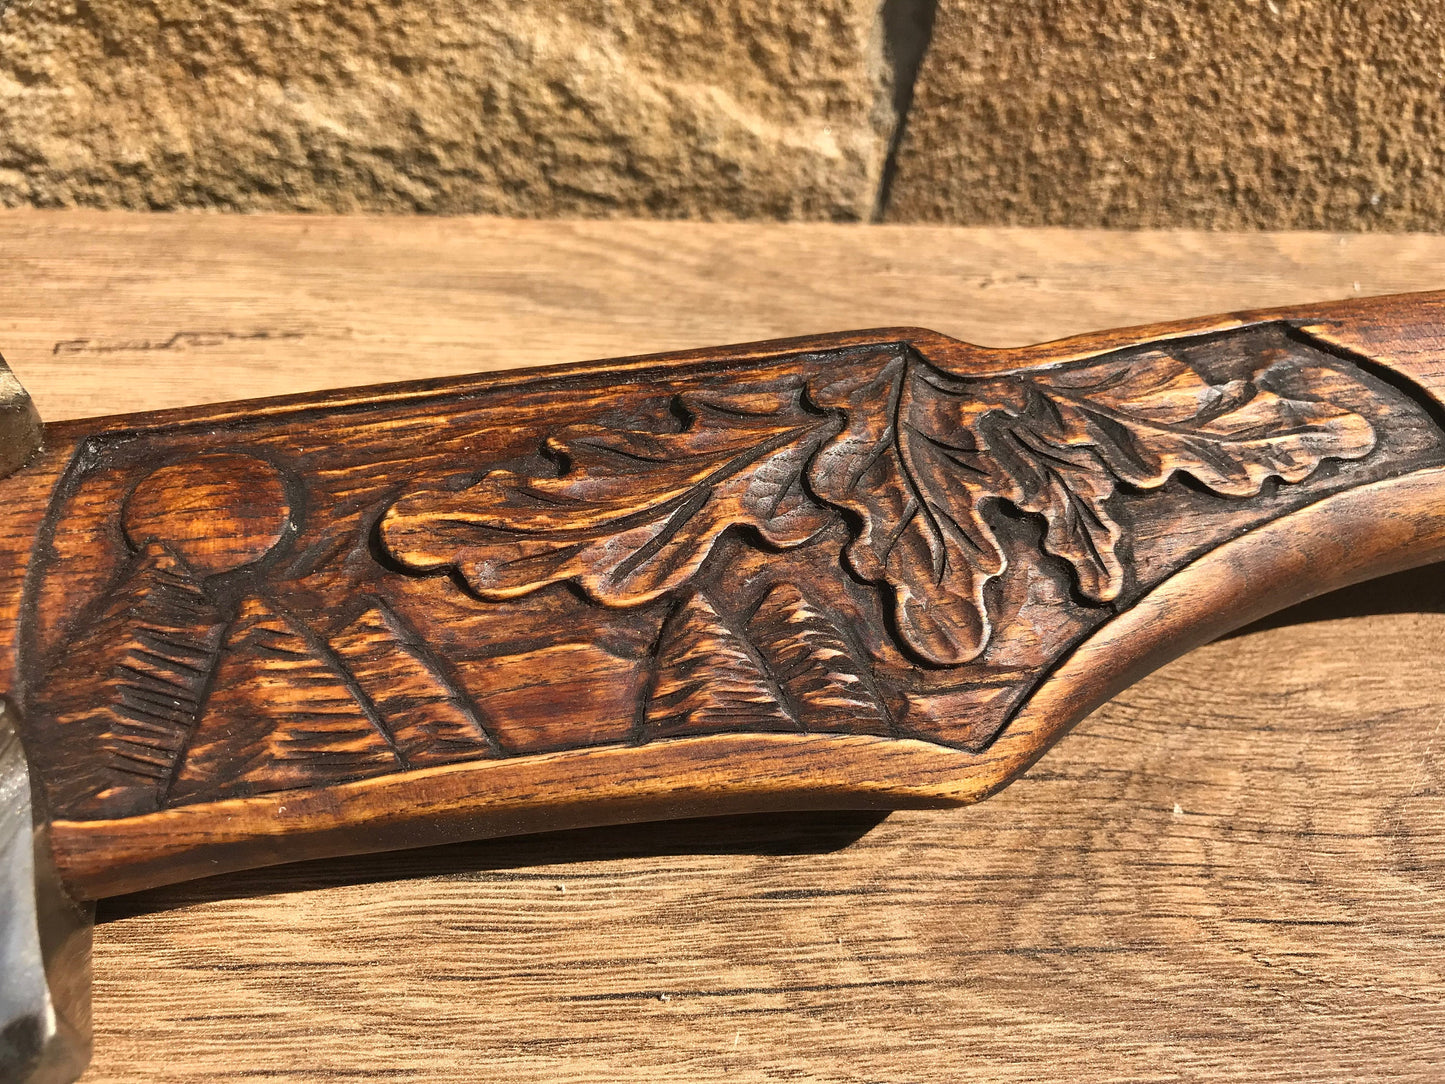 Personalized axe, axe gift, mens birthday gift, mens gift, viking axe, gifts for men, manly iron gifts, bear head, bear decor, carved bear